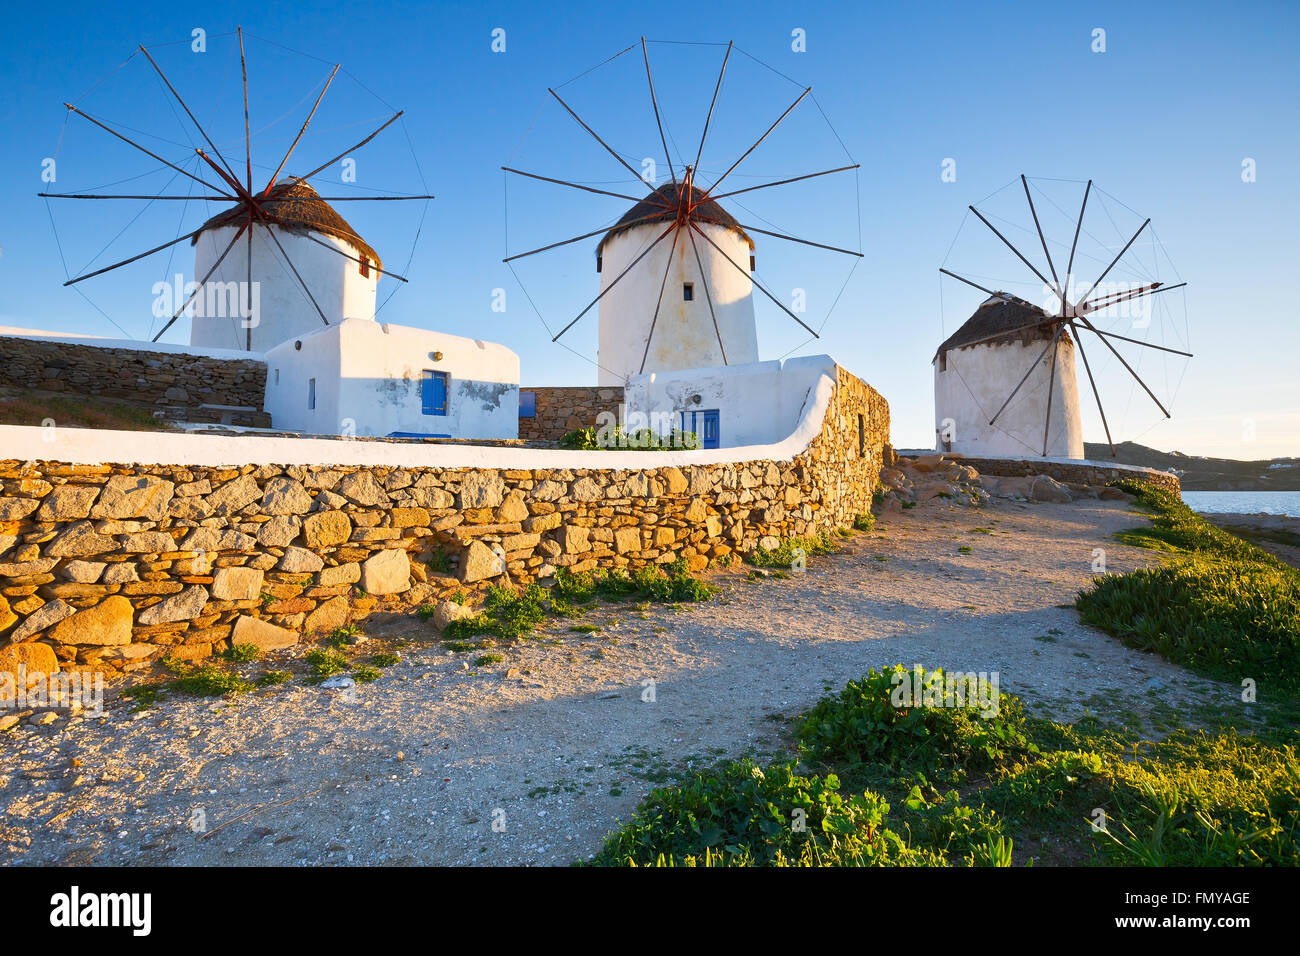 Traditional windmills in the town of Mykonos, Greece. Stock Photo